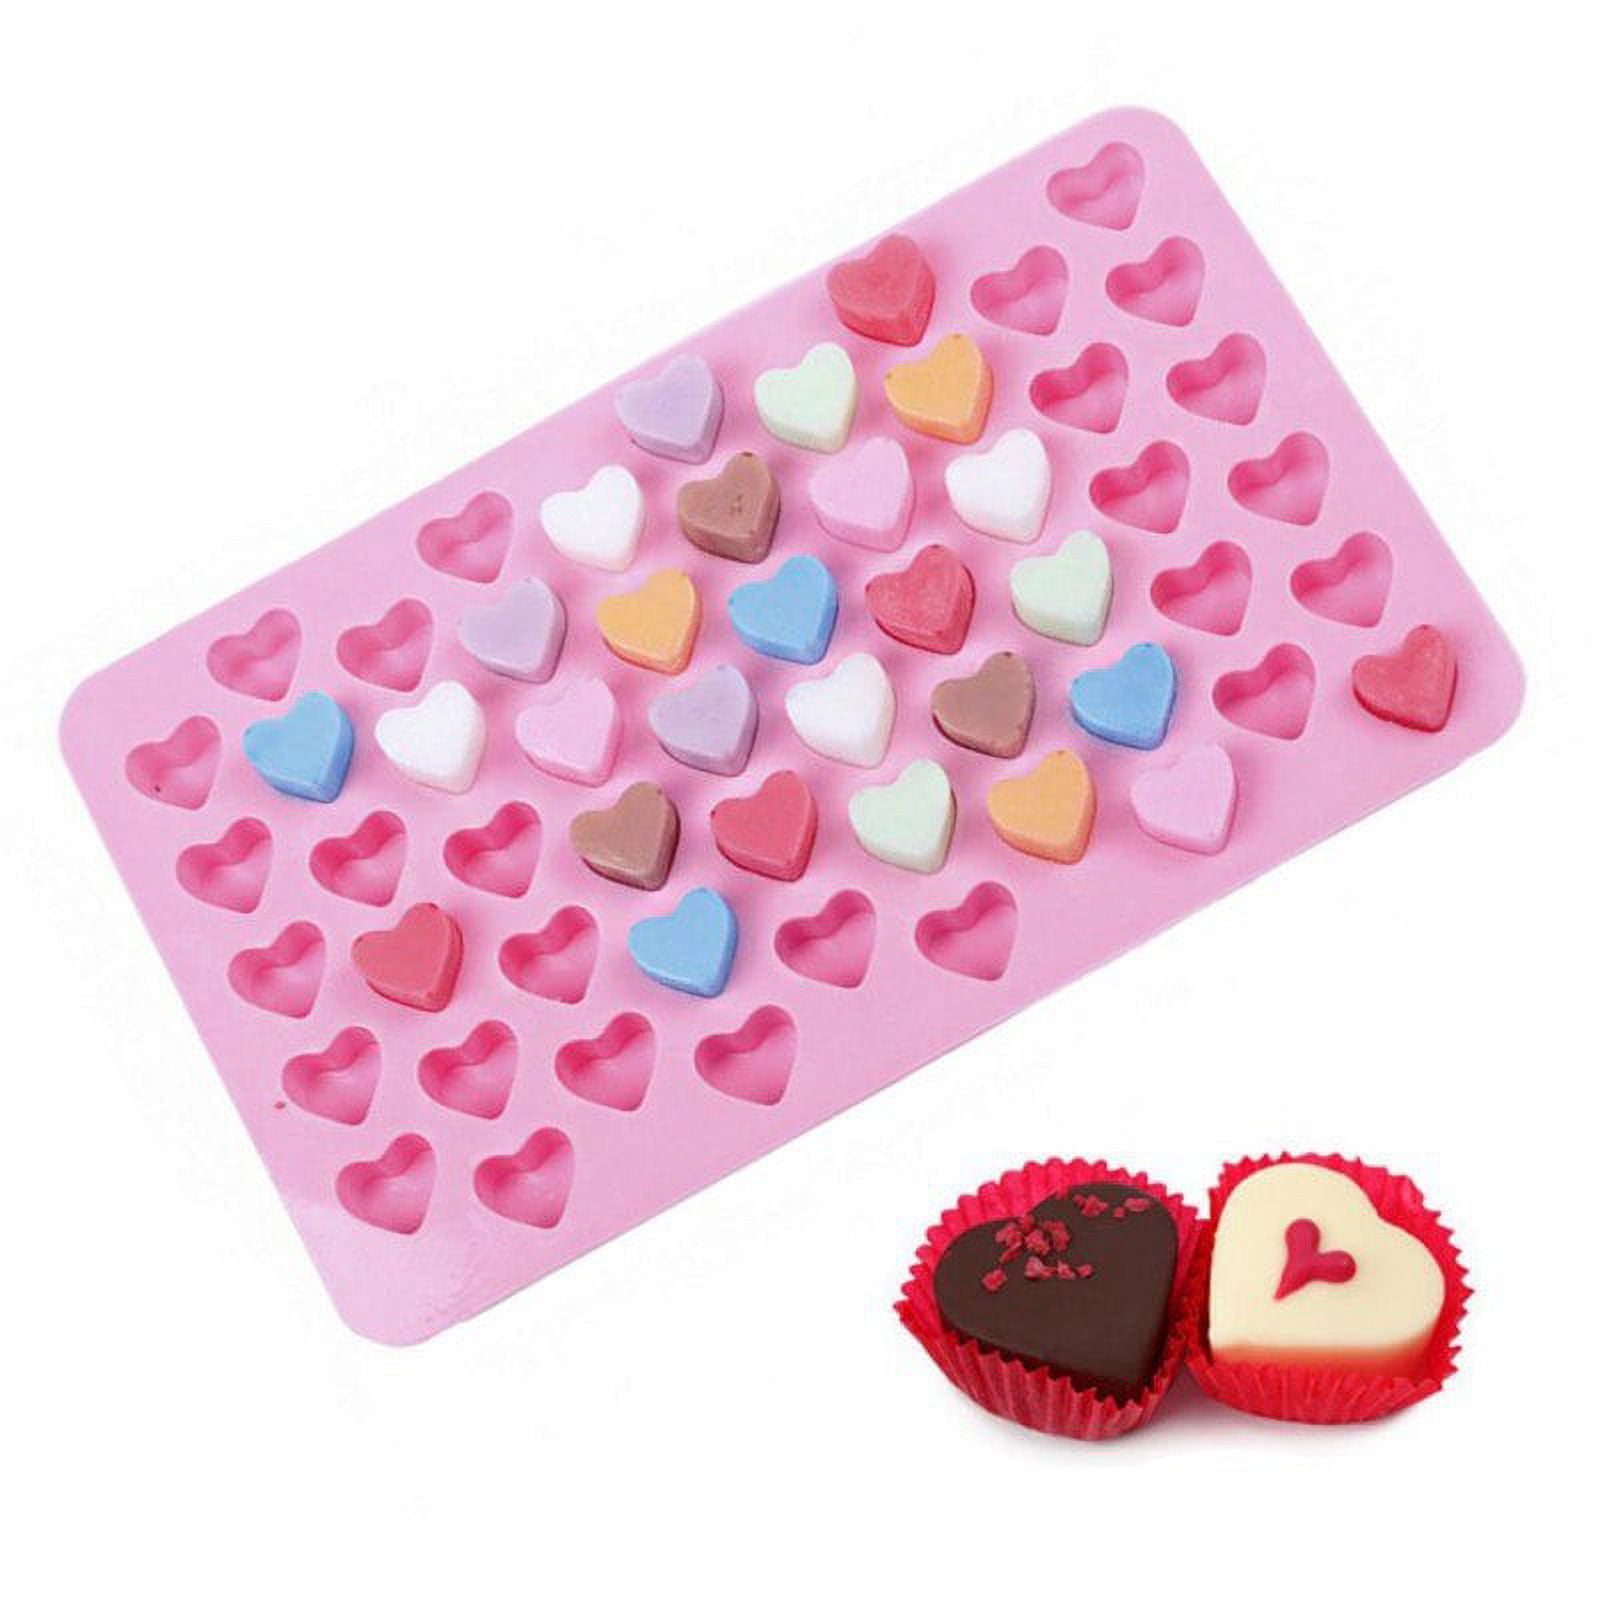 Cy3lf Silicone Mini Heart Shape Ice Cube Candy Chocolate Mold (Pack of 2)